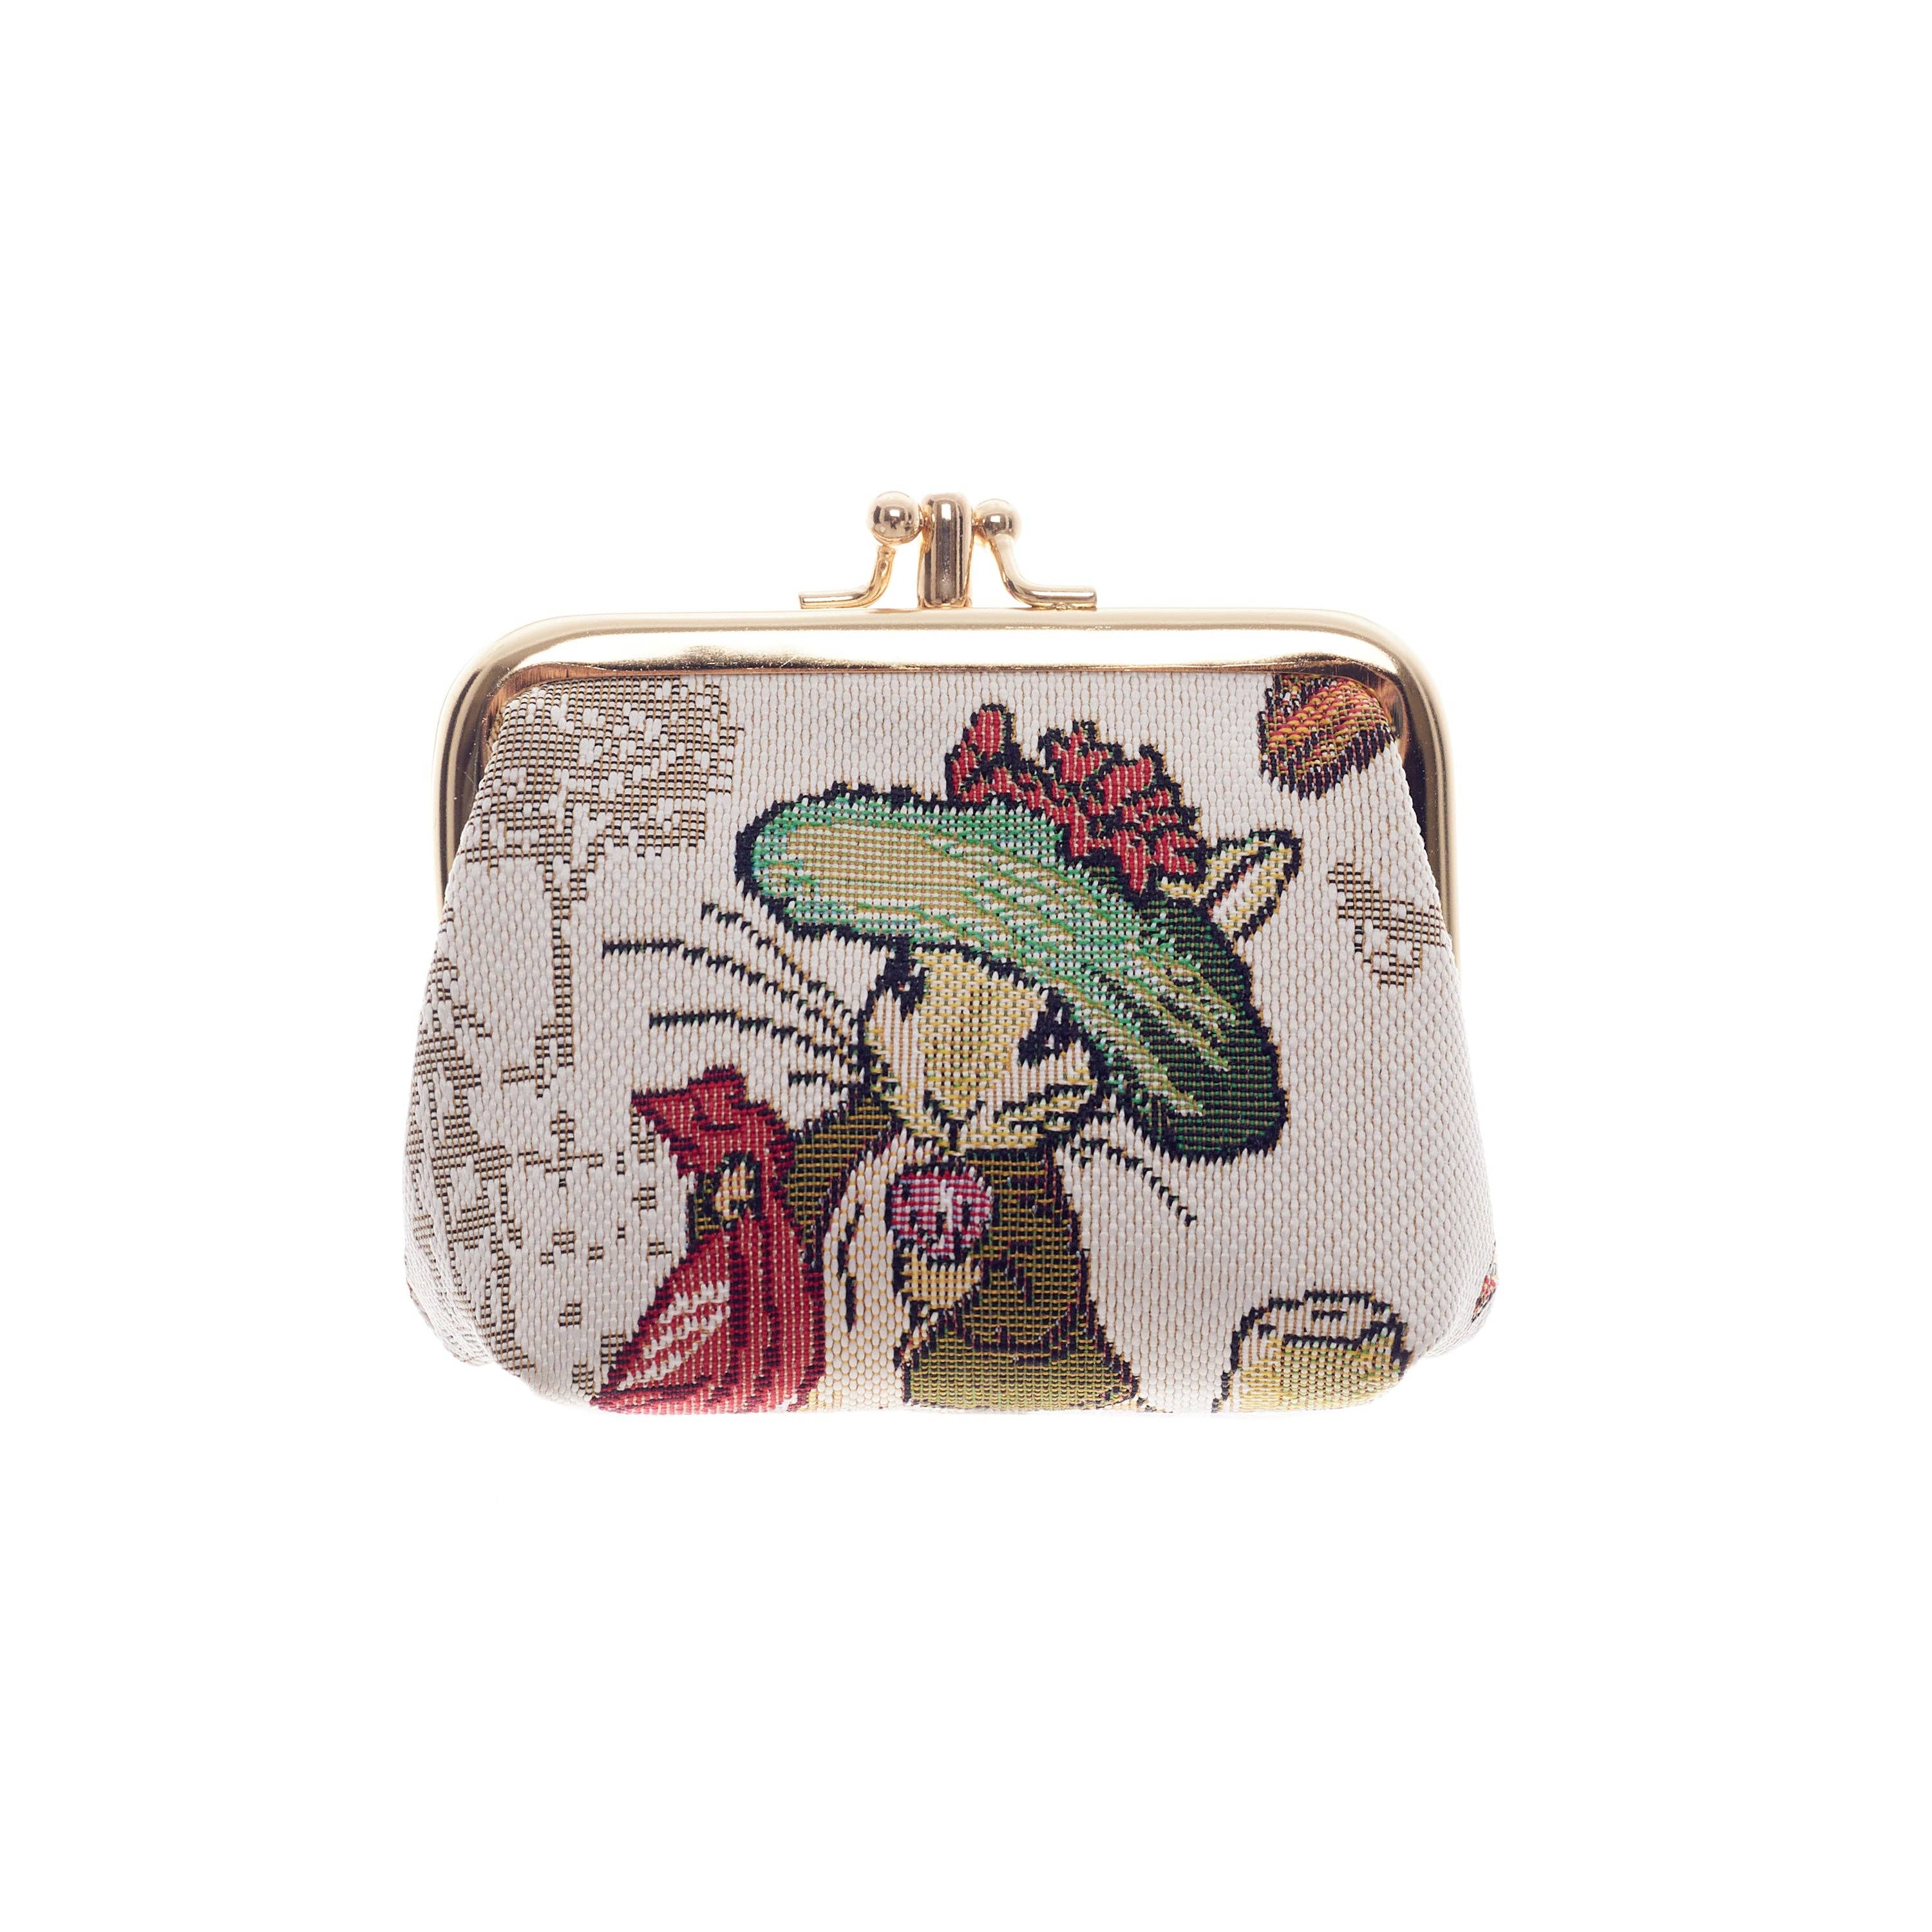 Benjamin Bunny Coin Purse - Out of the Blue